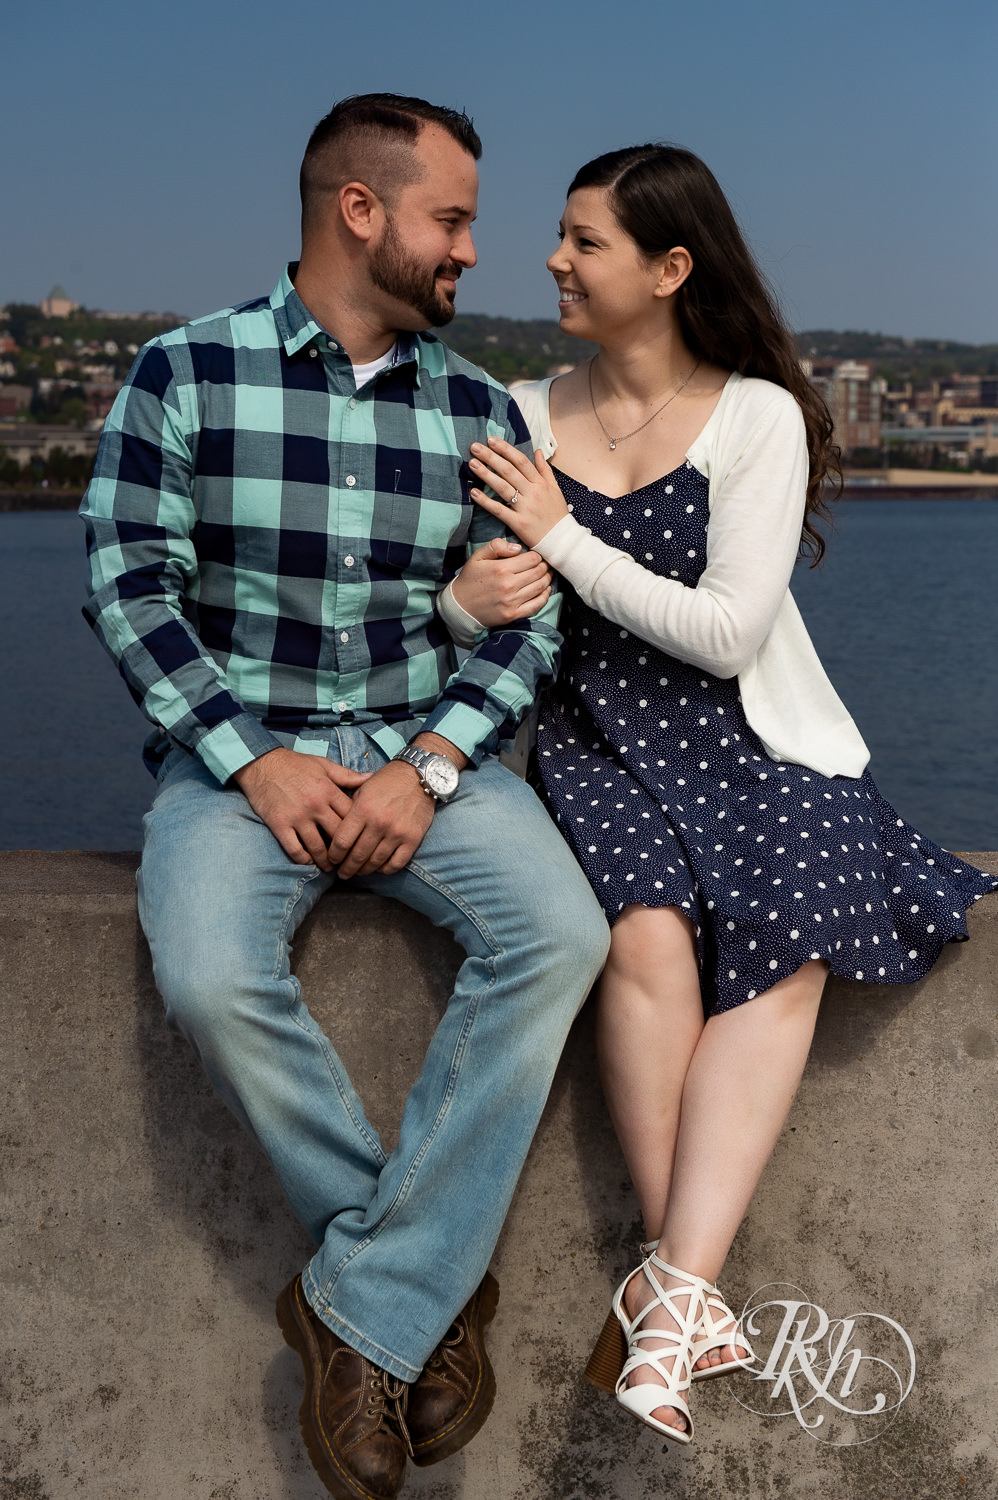 Man and woman smile with city in background during Canal Park engagement photos in Duluth, Minnesota.